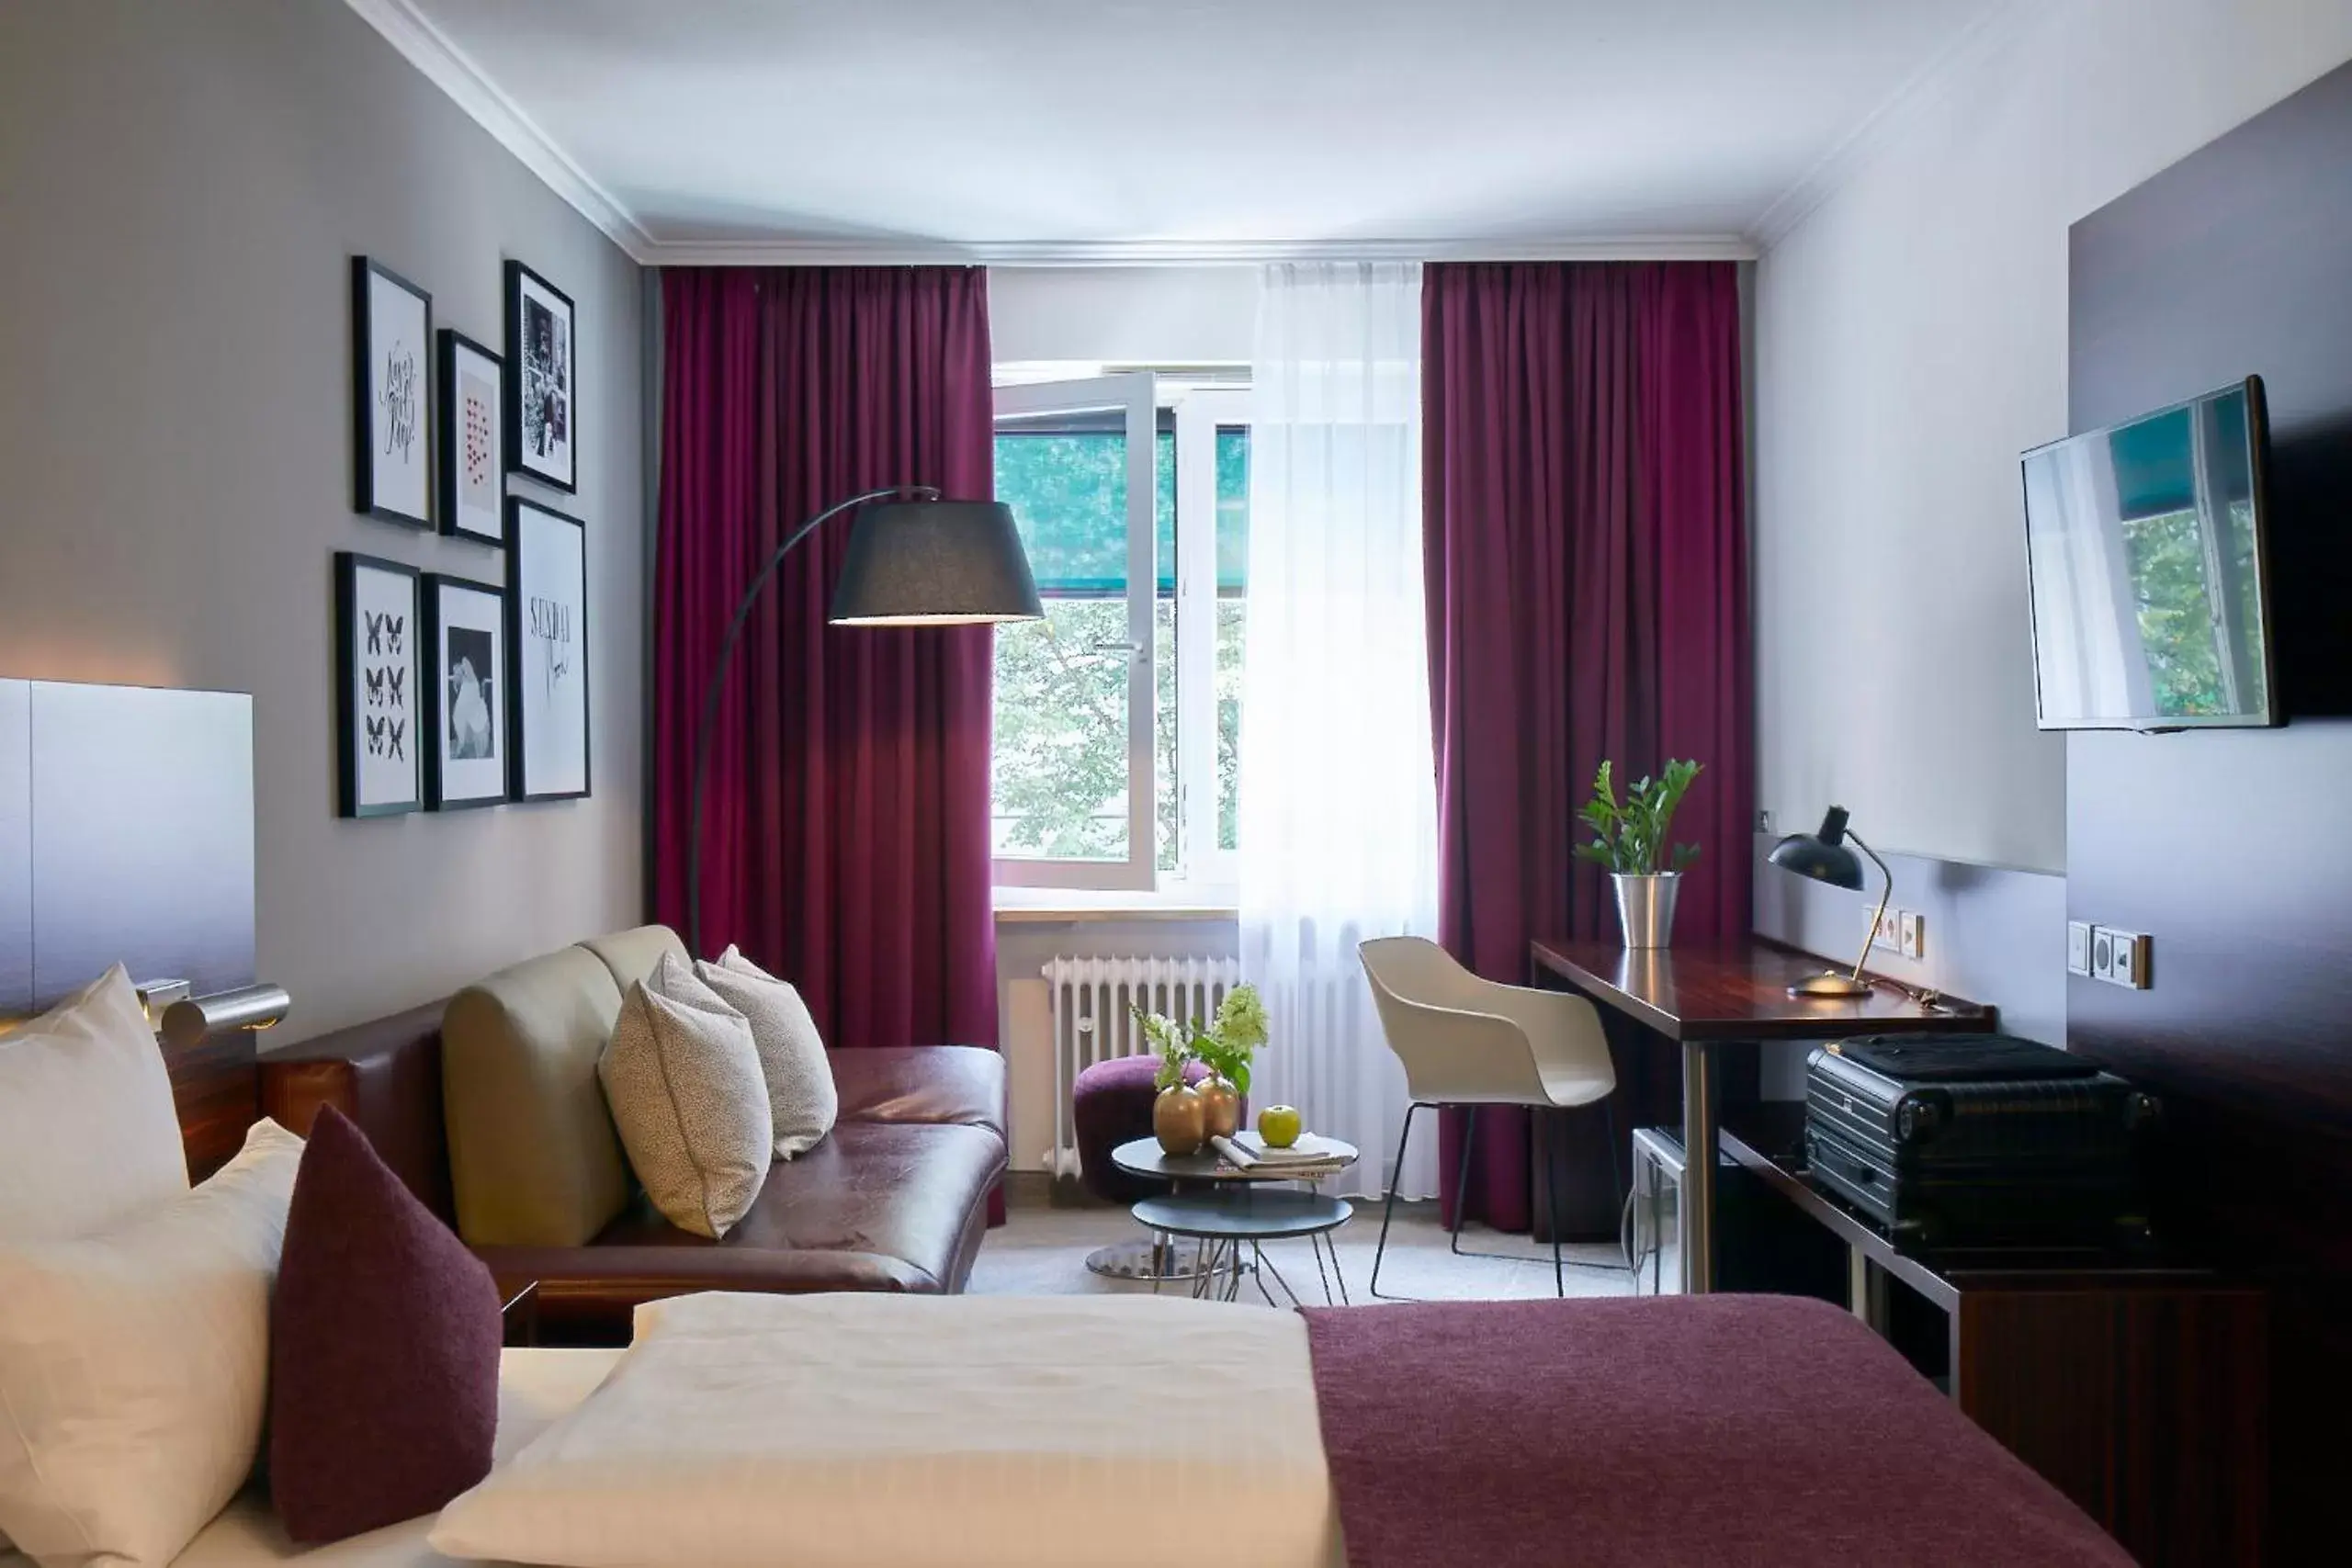 Deluxe Room in Hotel Metropol by Maier Privathotels